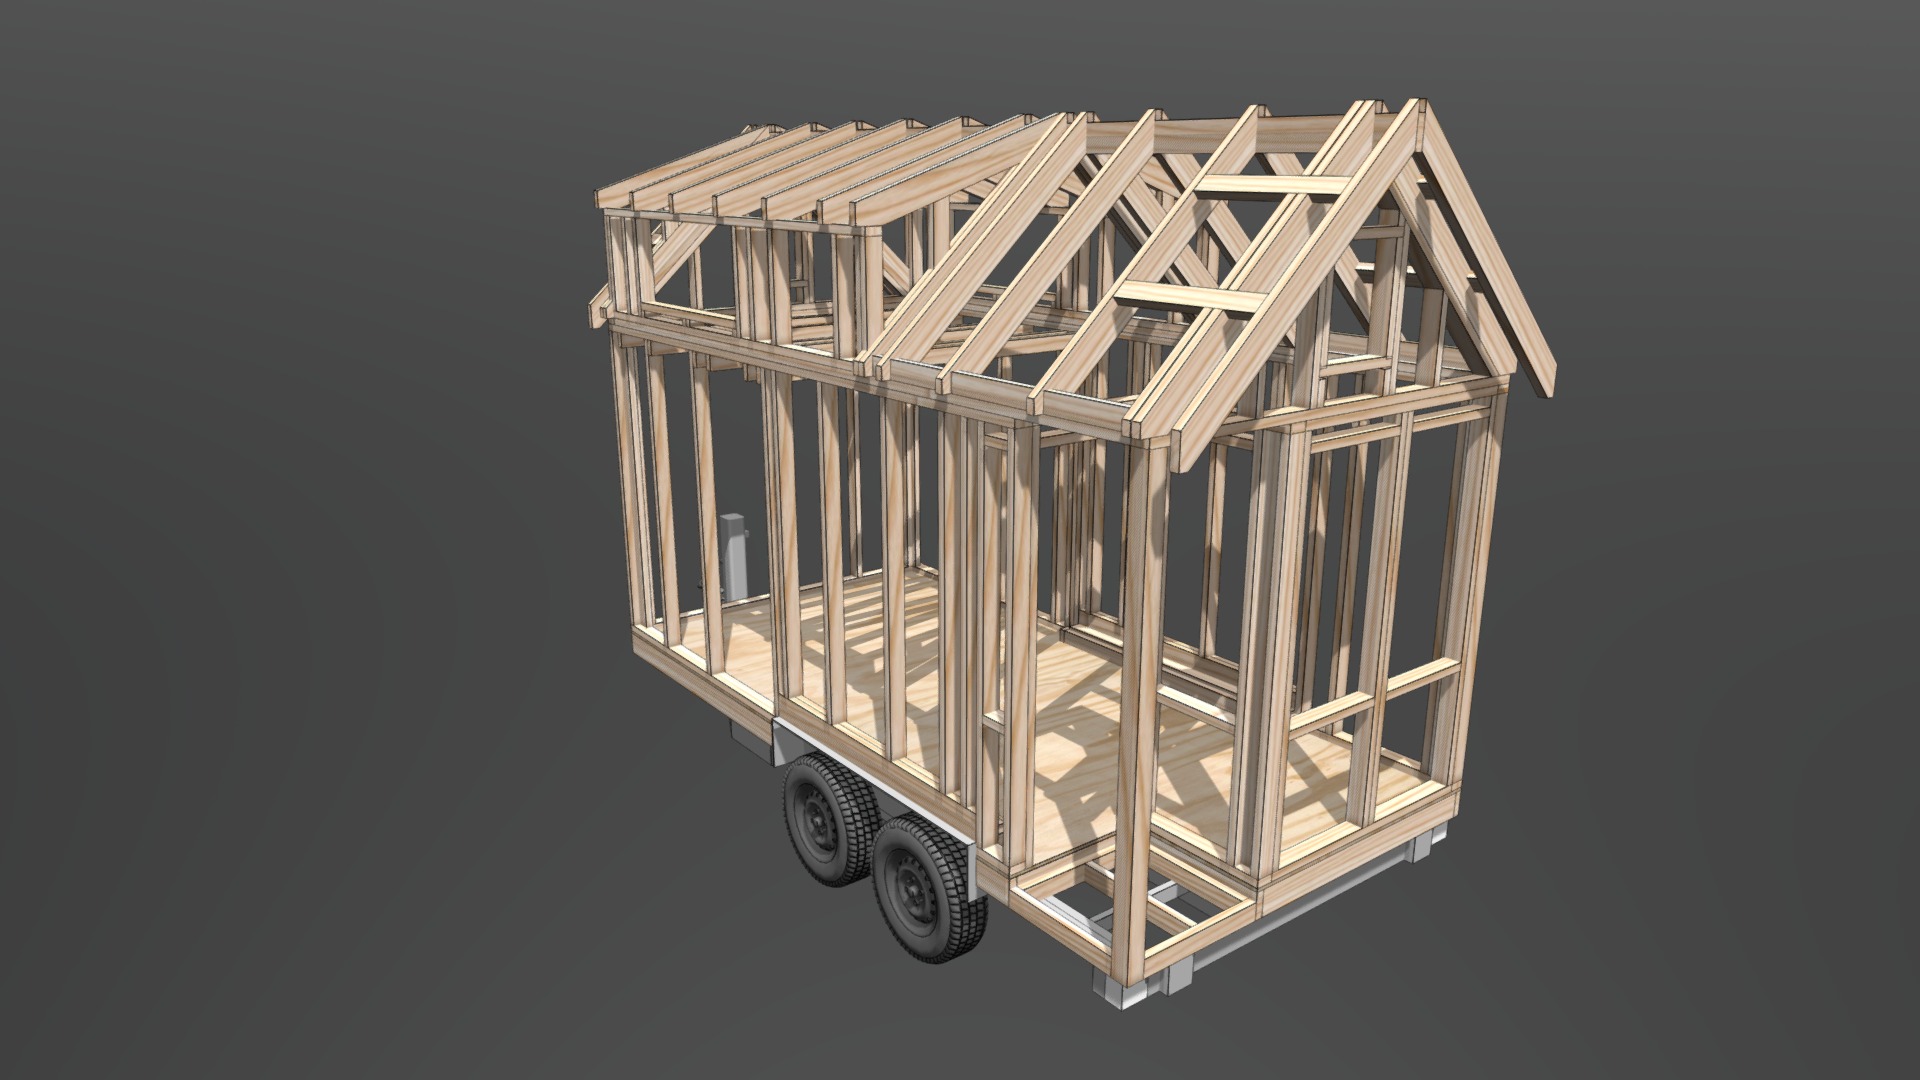 3D model 16x8_Frame_TinyHome - This is a 3D model of the 16x8_Frame_TinyHome. The 3D model is about a wooden structure on a trailer.